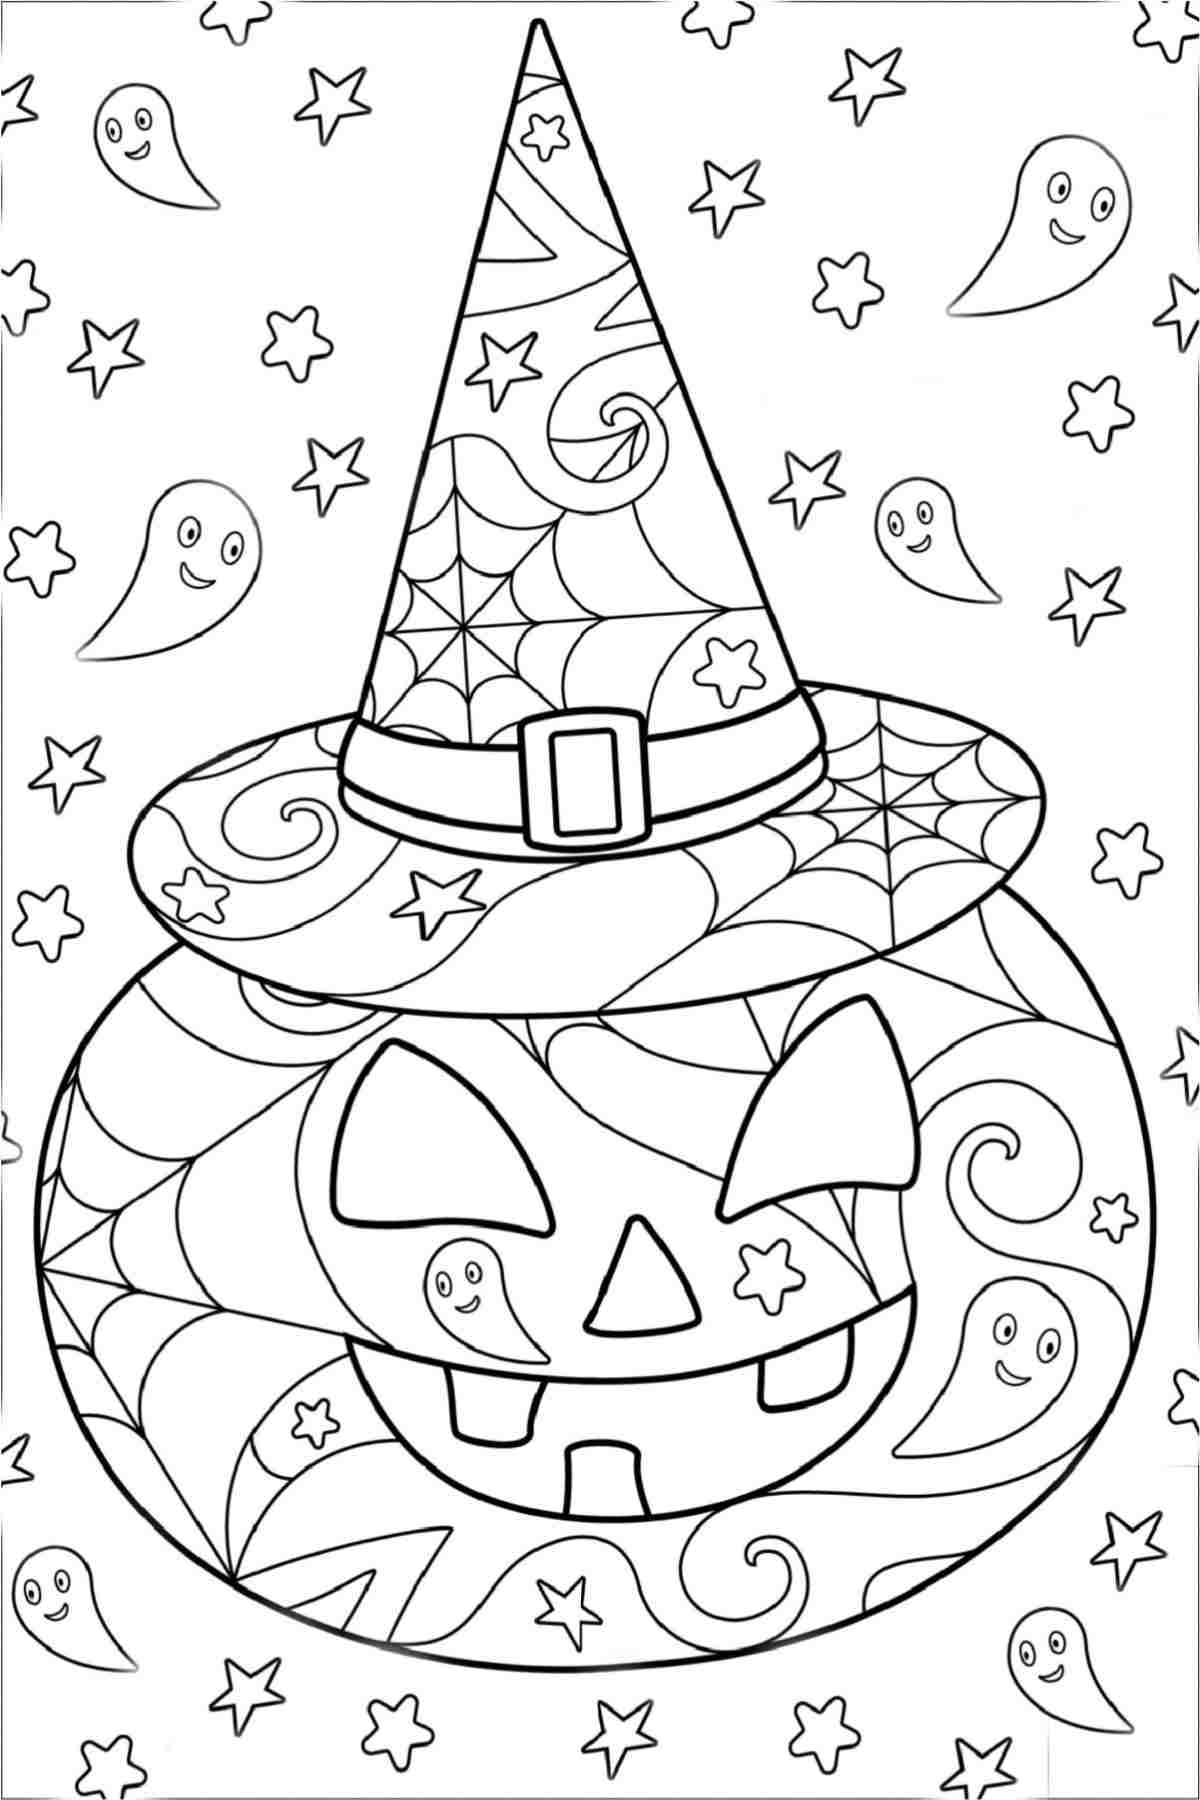 Halloween coloring sheets with a large, toothy, jack o lantern wearing a pointed witches hat in the center of the printable coloring pages, and tiny stars surrounding it.